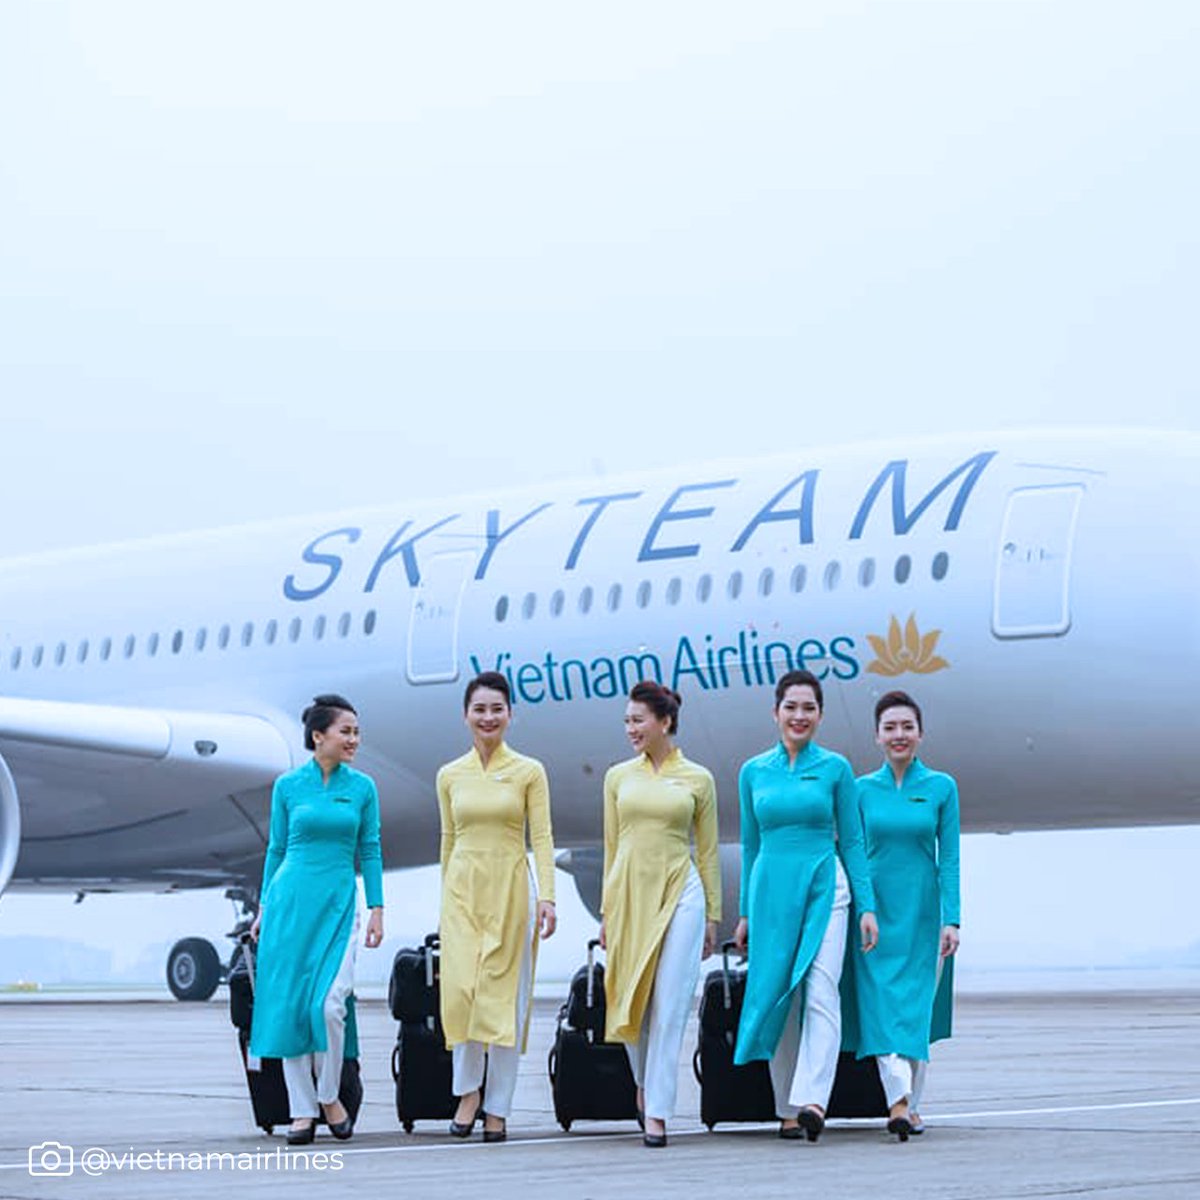 Vietnam Airlines is taking strides toward a greener future! 🌿✈️ With innovative steps like cutting out nylon bag use, introducing the eco-friendly PressReader app, and upgrading to fuel-efficient aircraft, they're on a mission to achieve net-zero emissions by 2050.#SkyTeam…